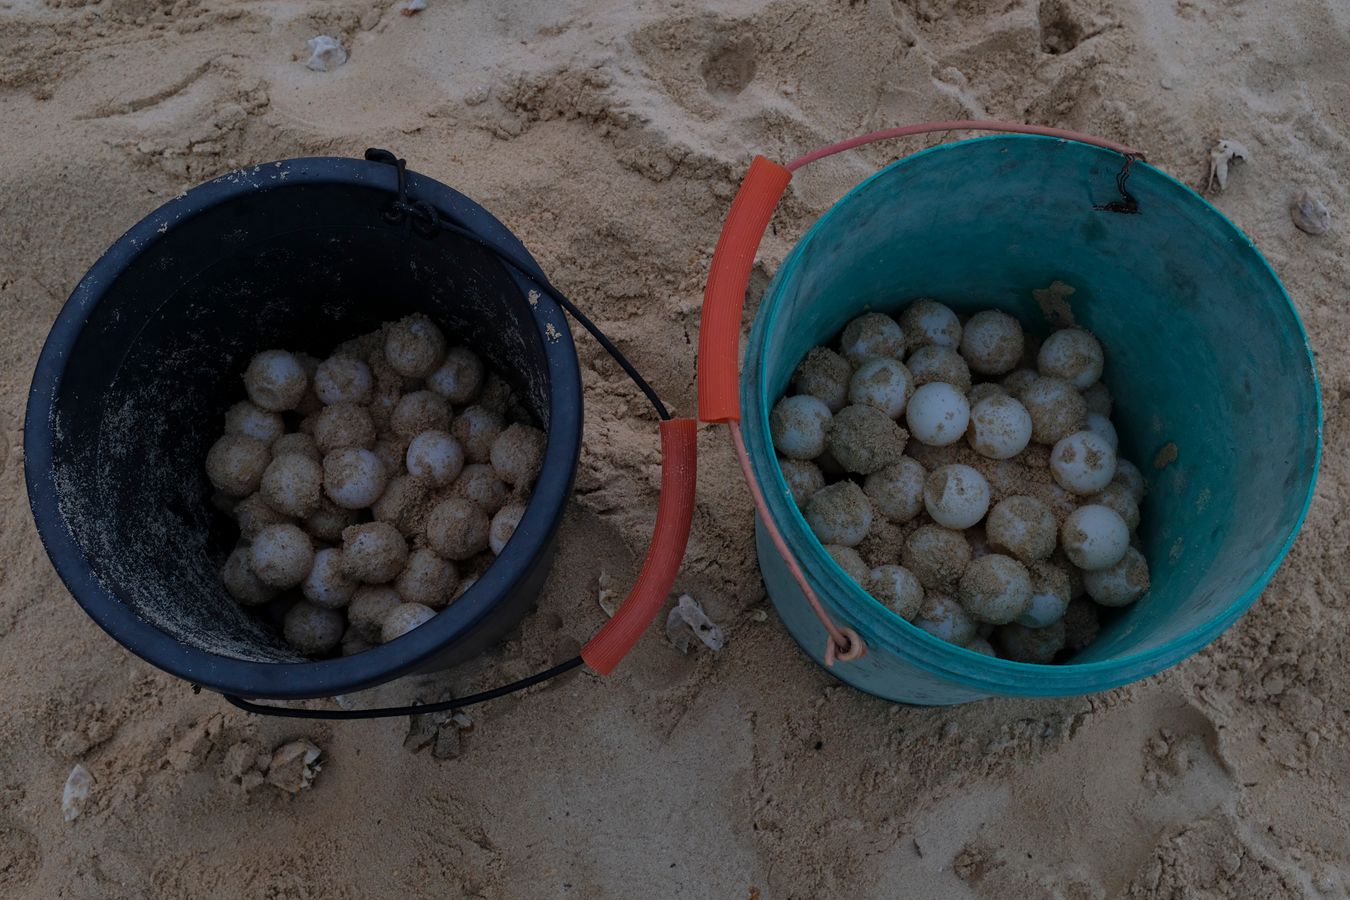 Two bucket with green turtle eggs just taken from their nests.